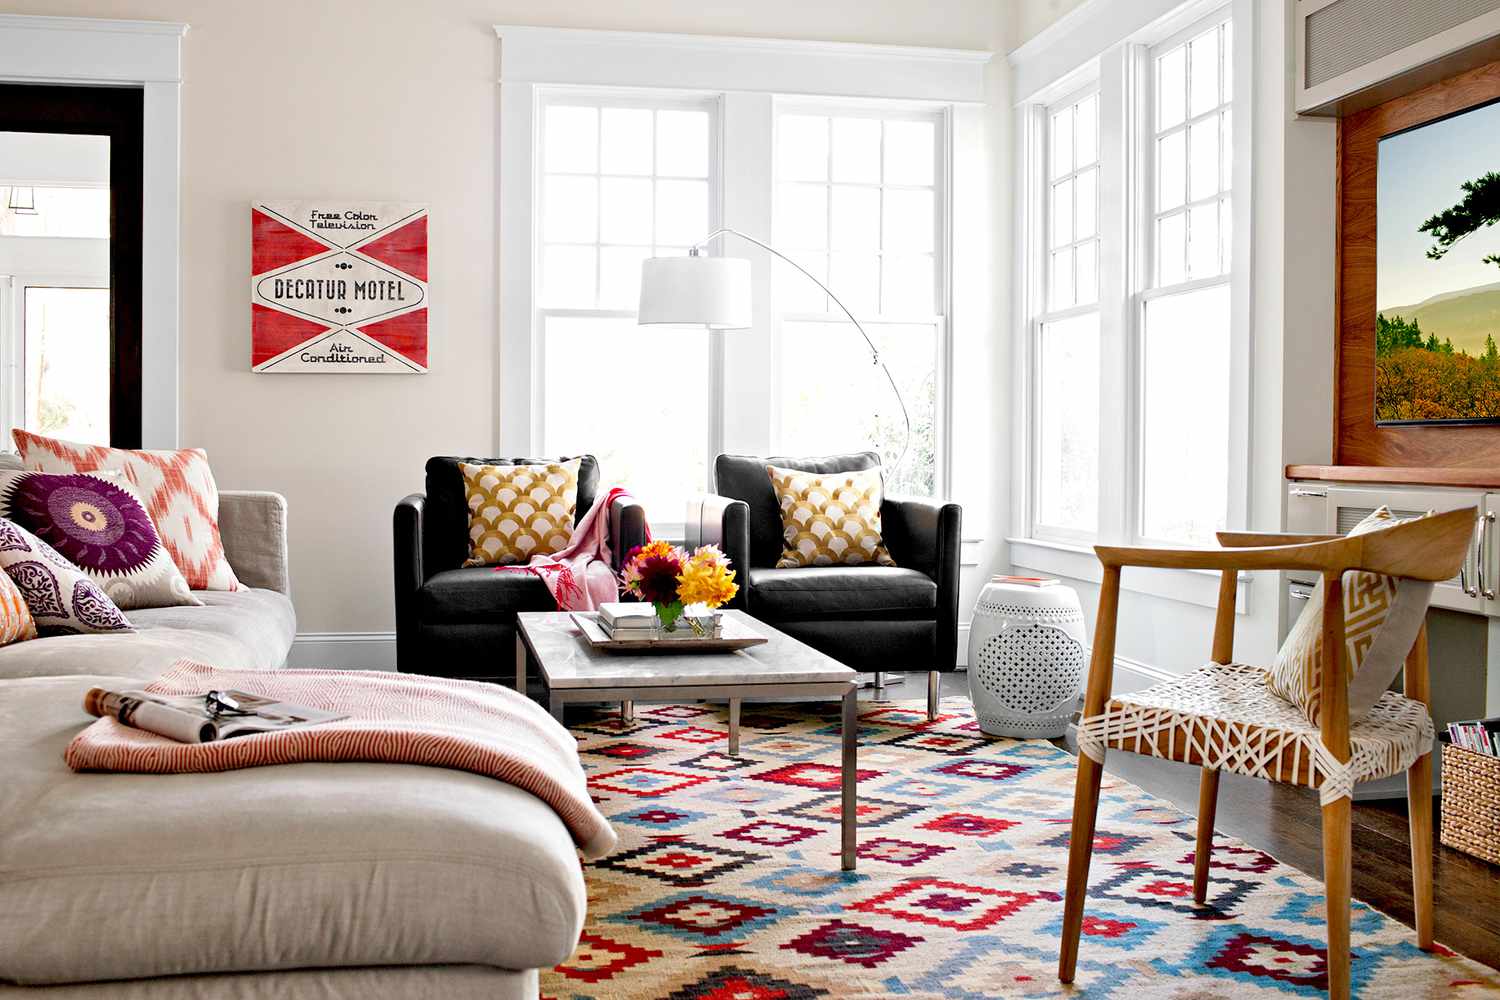 Living room with couches and patterned rug